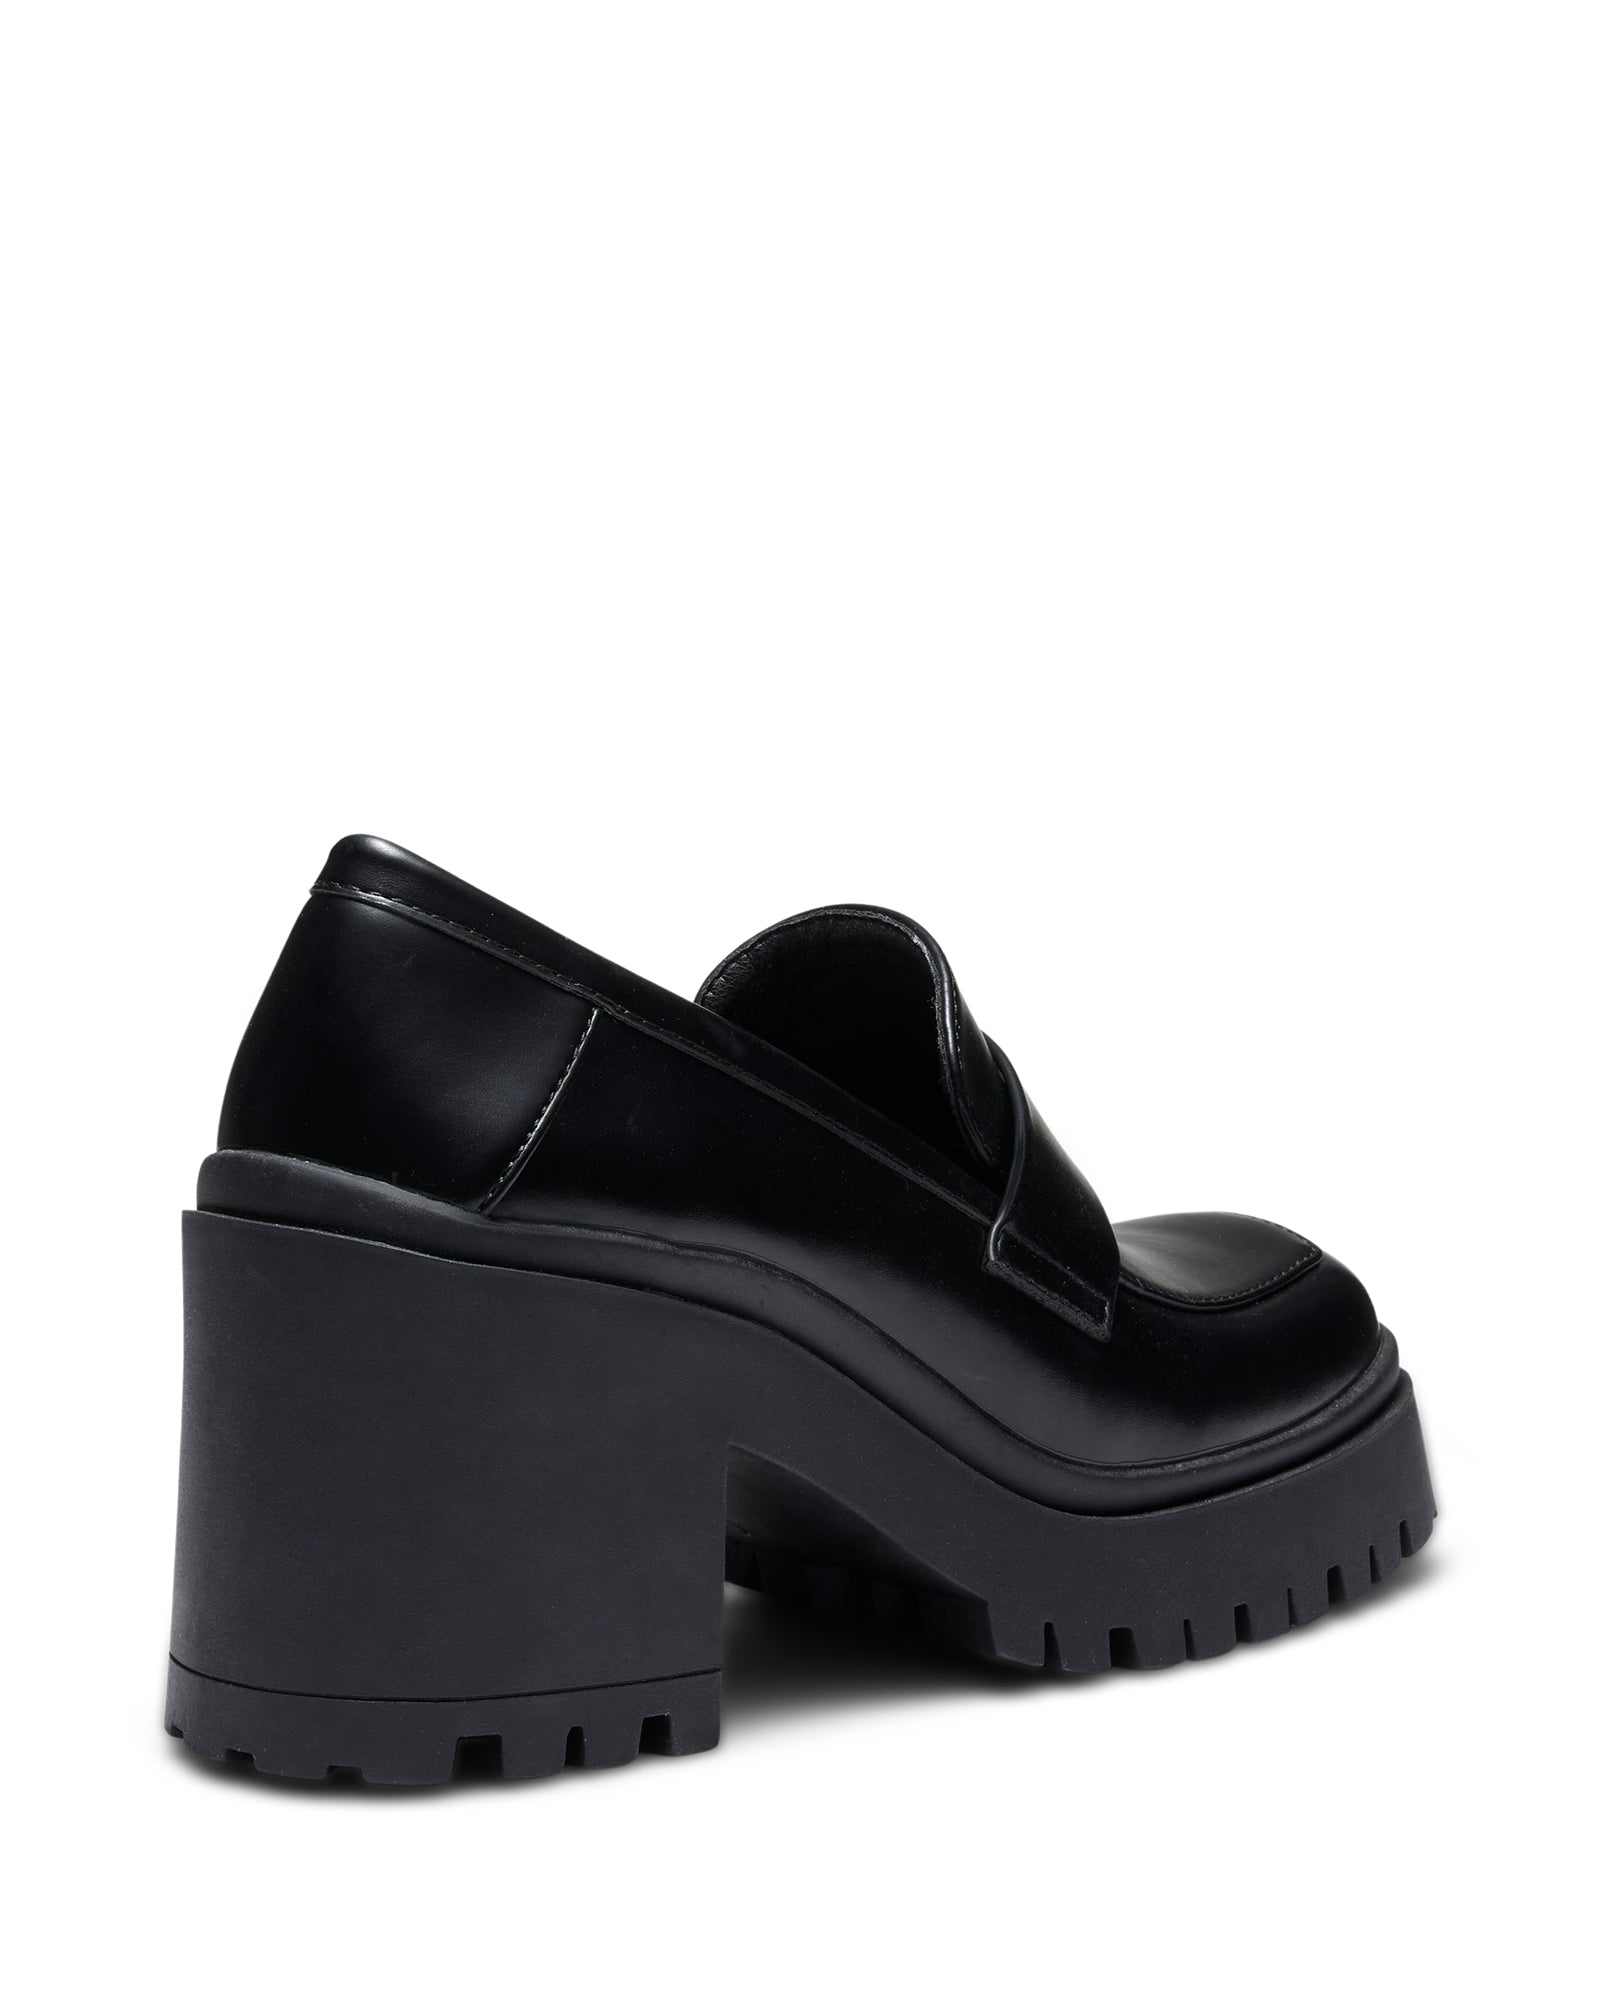 Therapy Shoes Prompt Black | Women's Loafers | Heels | Platform | Chunky